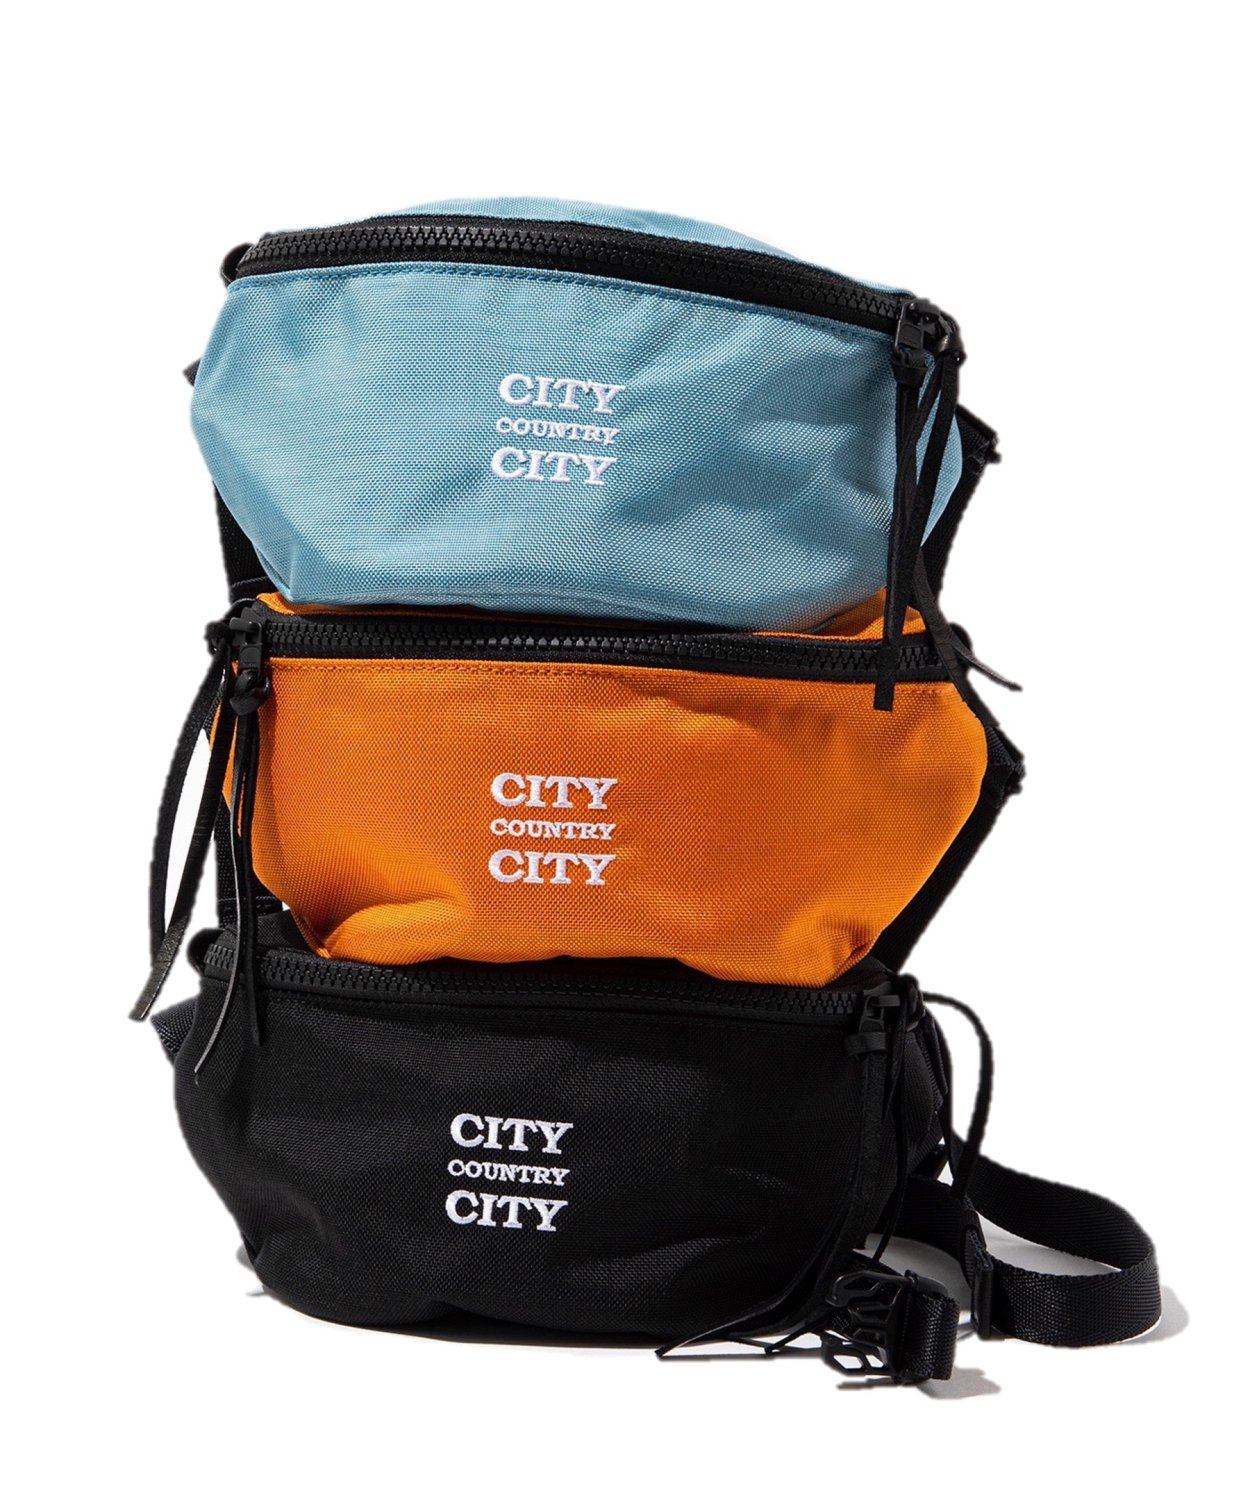 HOBO / EVERYDAY WAIST POUCH NYLON OXFORD for CITY COUNTRY CITY